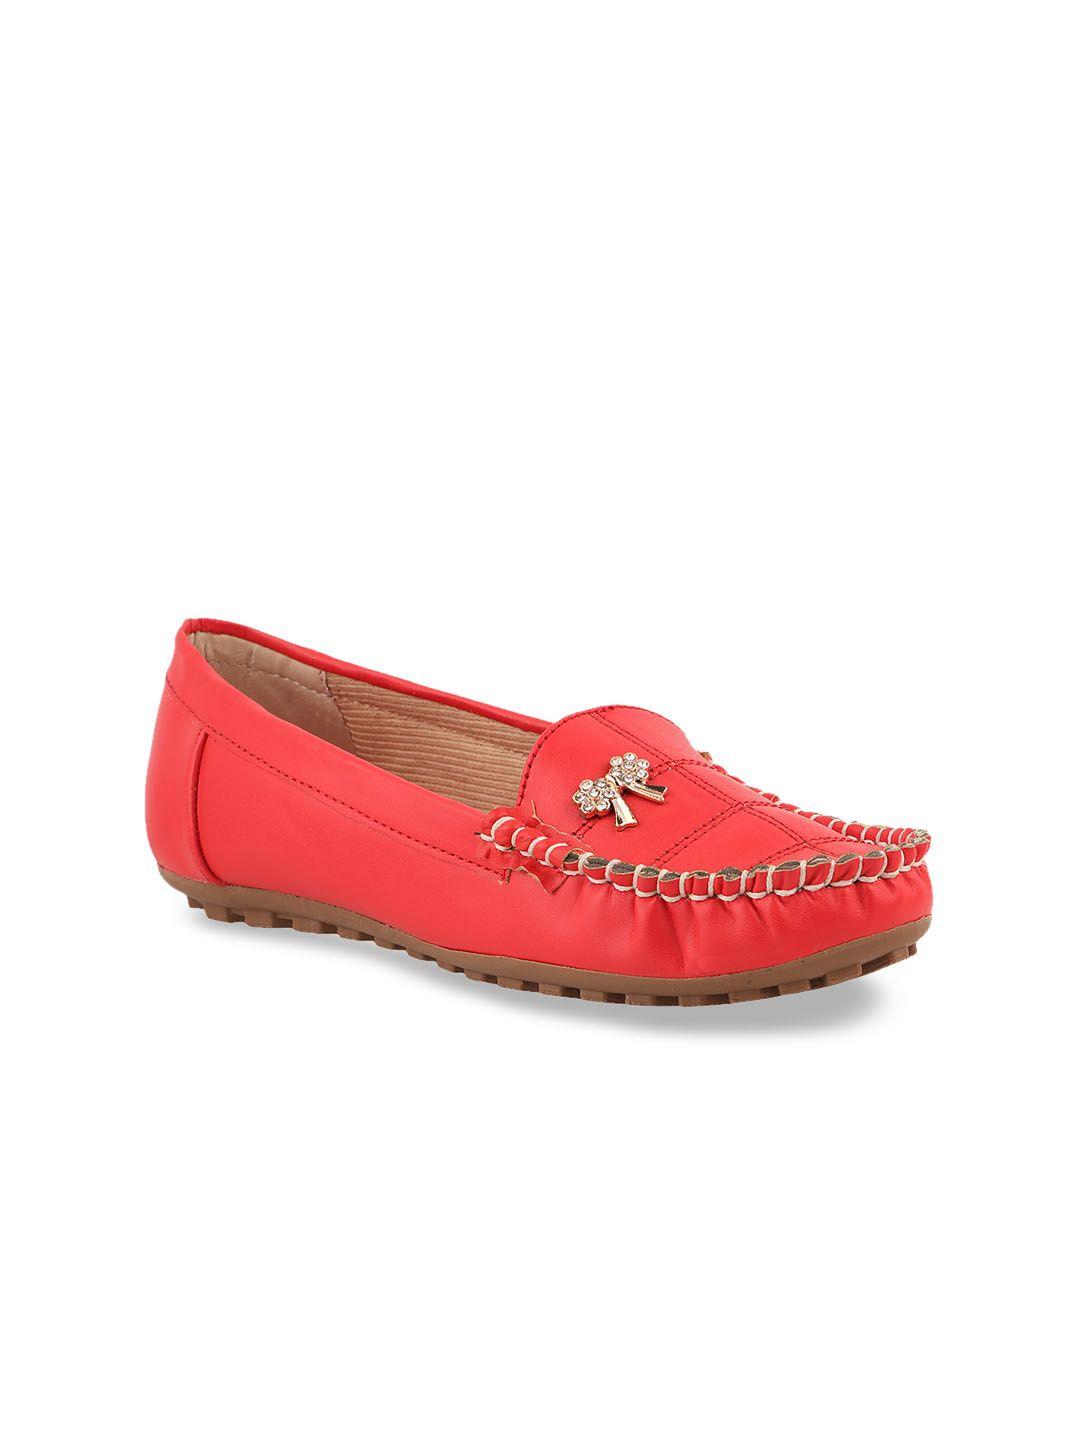 pery pao women embellished synthetic loafers